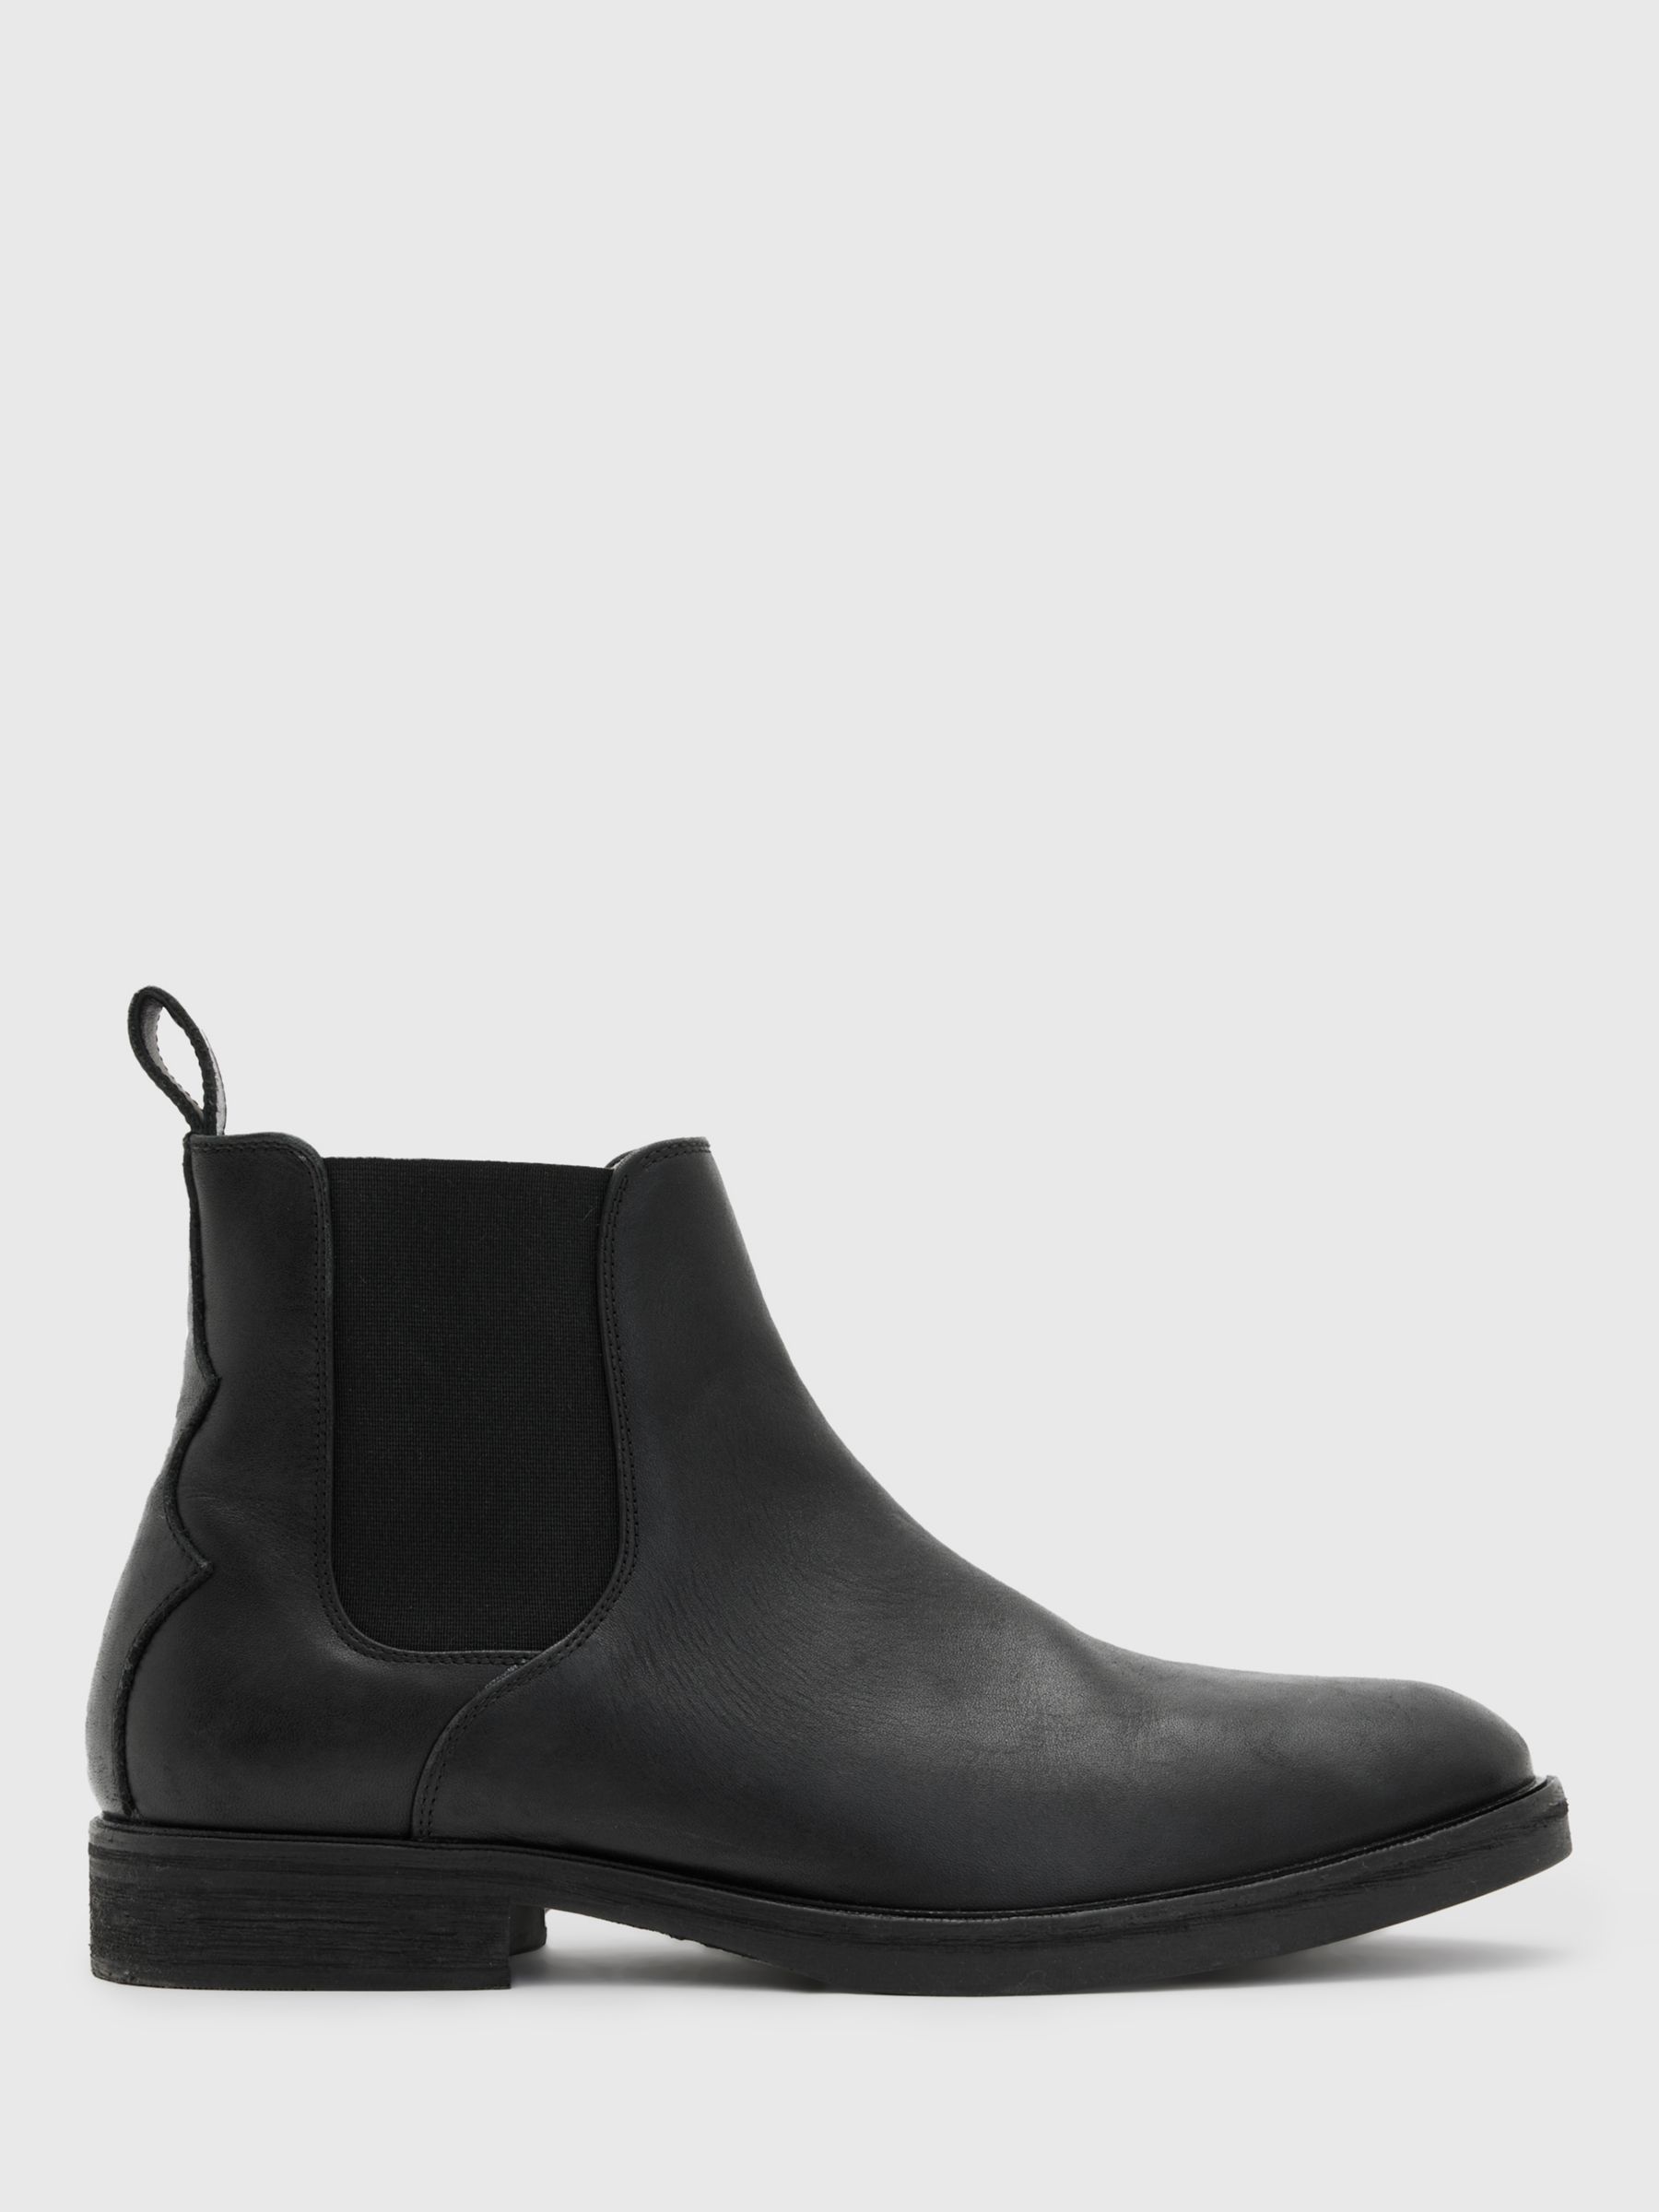 AllSaints Creed Leather Chelsea Boots, Black at John Lewis & Partners